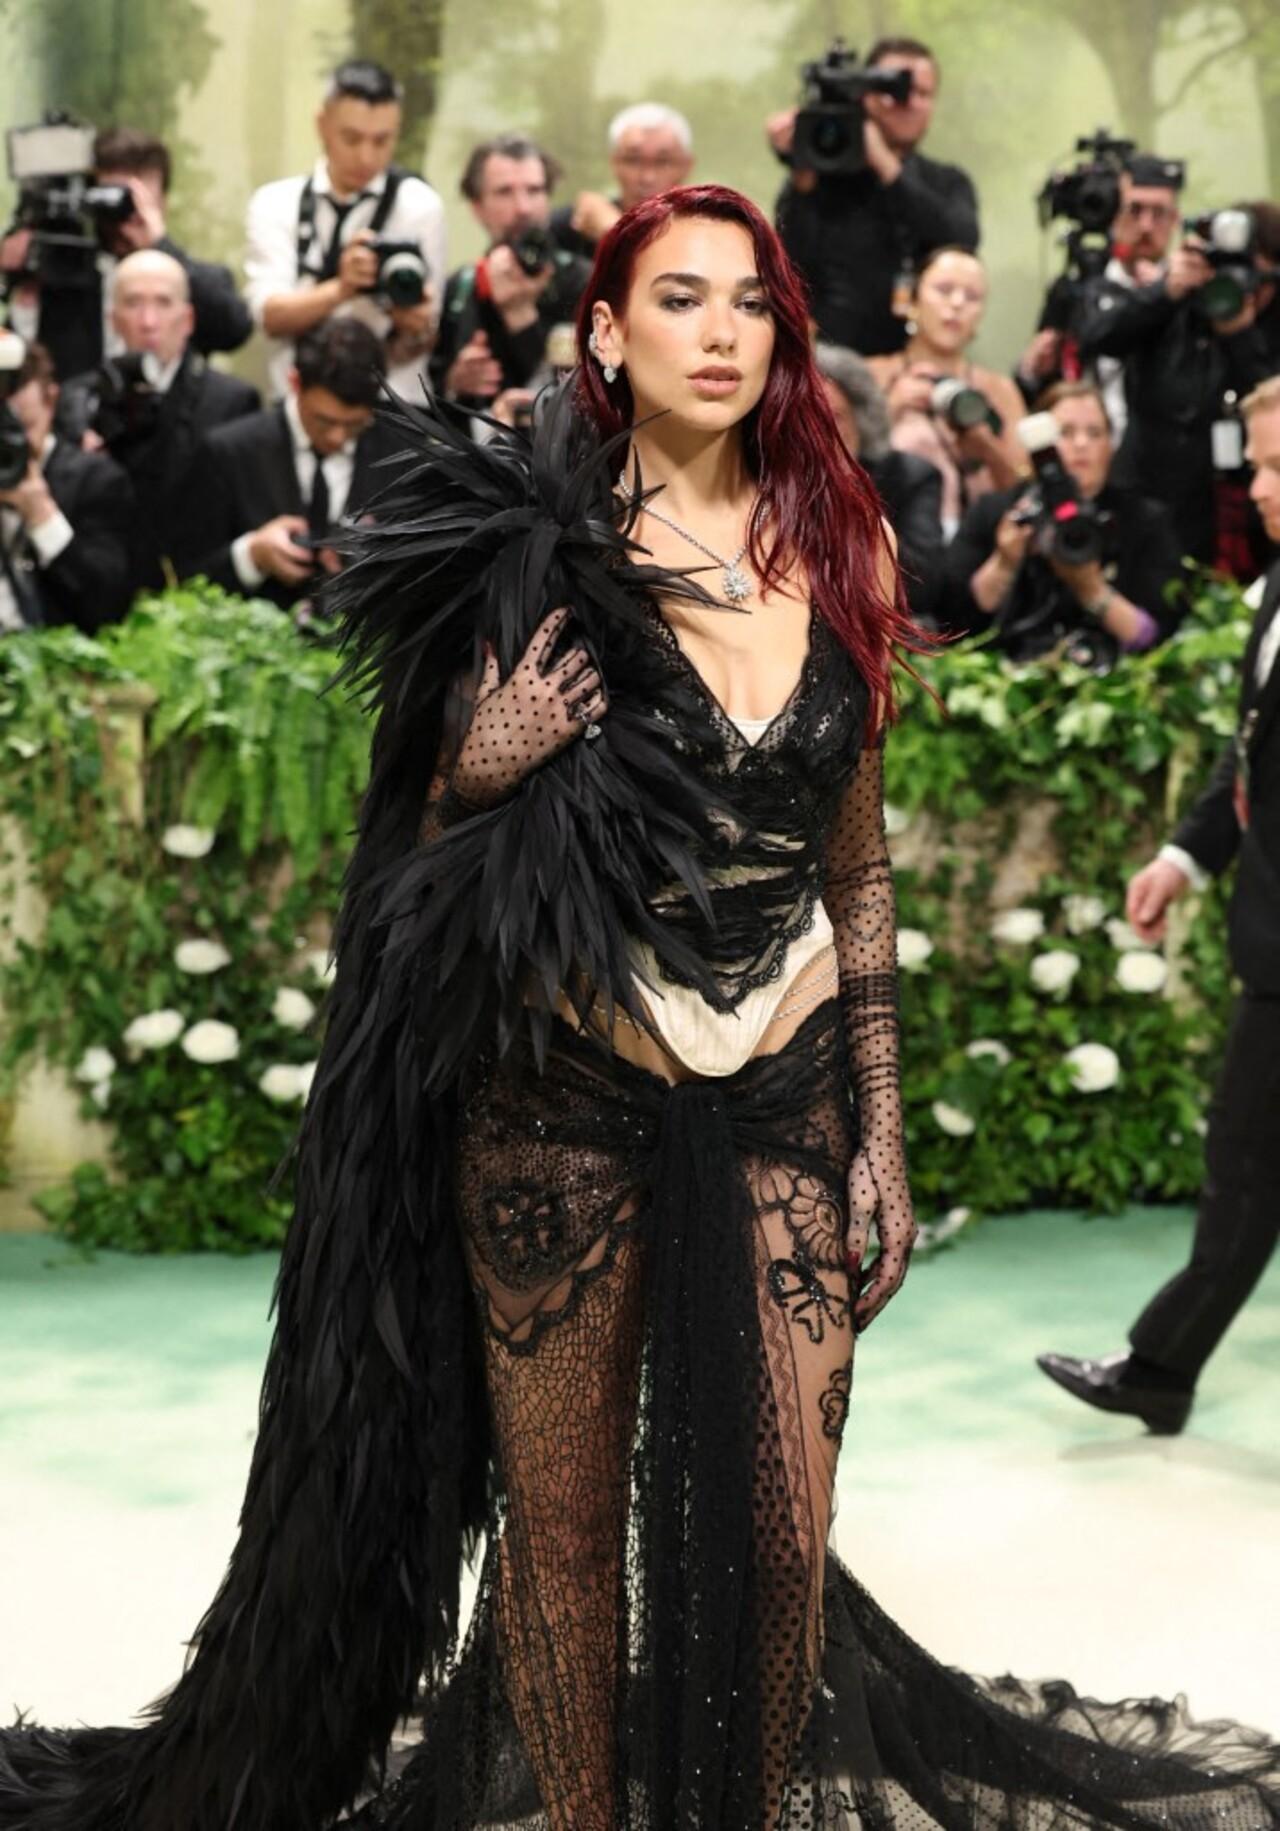 Singer Dua Lipa served an all-black look wearing a skin-bearing lace skirt and corset set that featured an array of intricate details sure to inspire some double takes. To top off the lace black-and-cream look, the Radical Optimism artist accessorized with a black feather boa draped across her shoulder, sheer gloves, a diamond necklace, and a diamond body chain that draped across her low waist. 